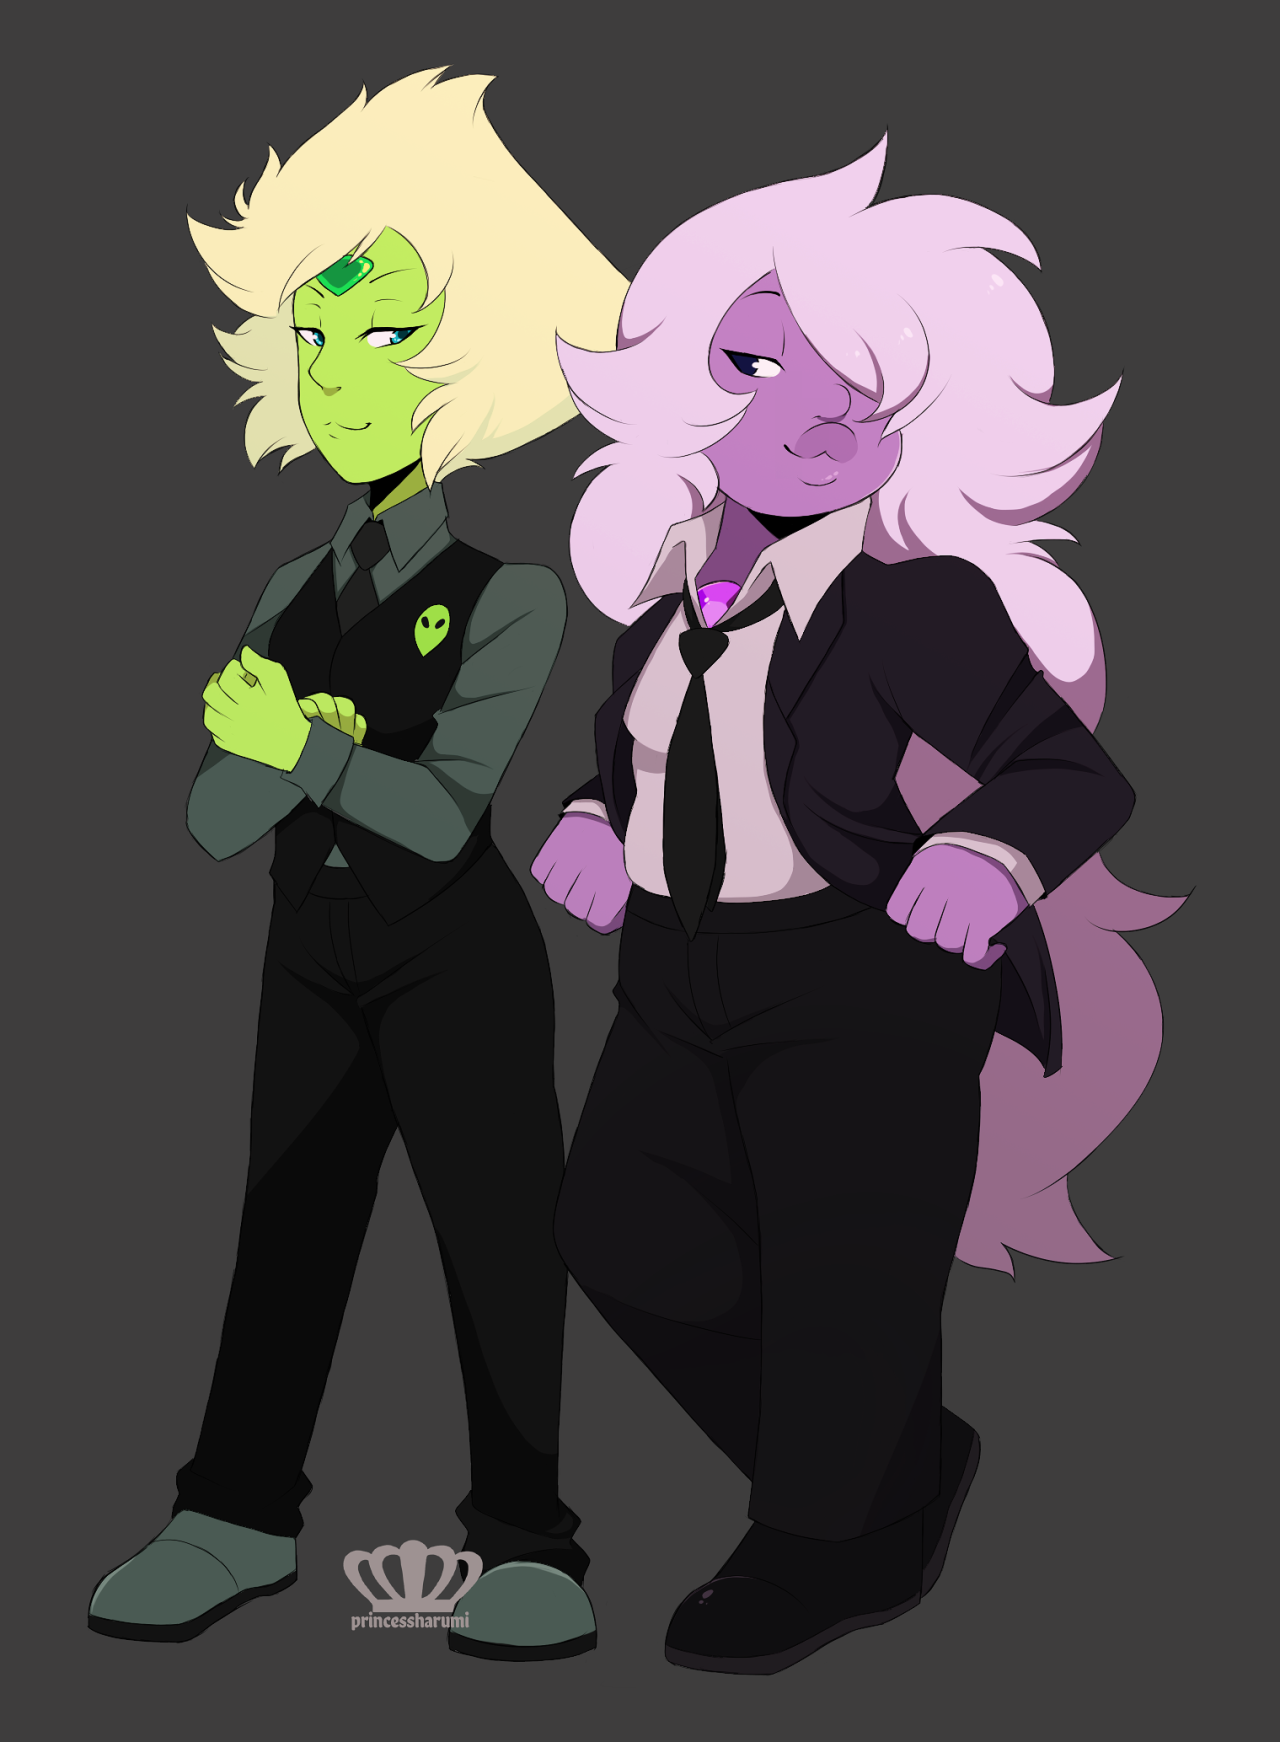 Gems in suits !! I’ve been working on this photoset on and off for the past couple